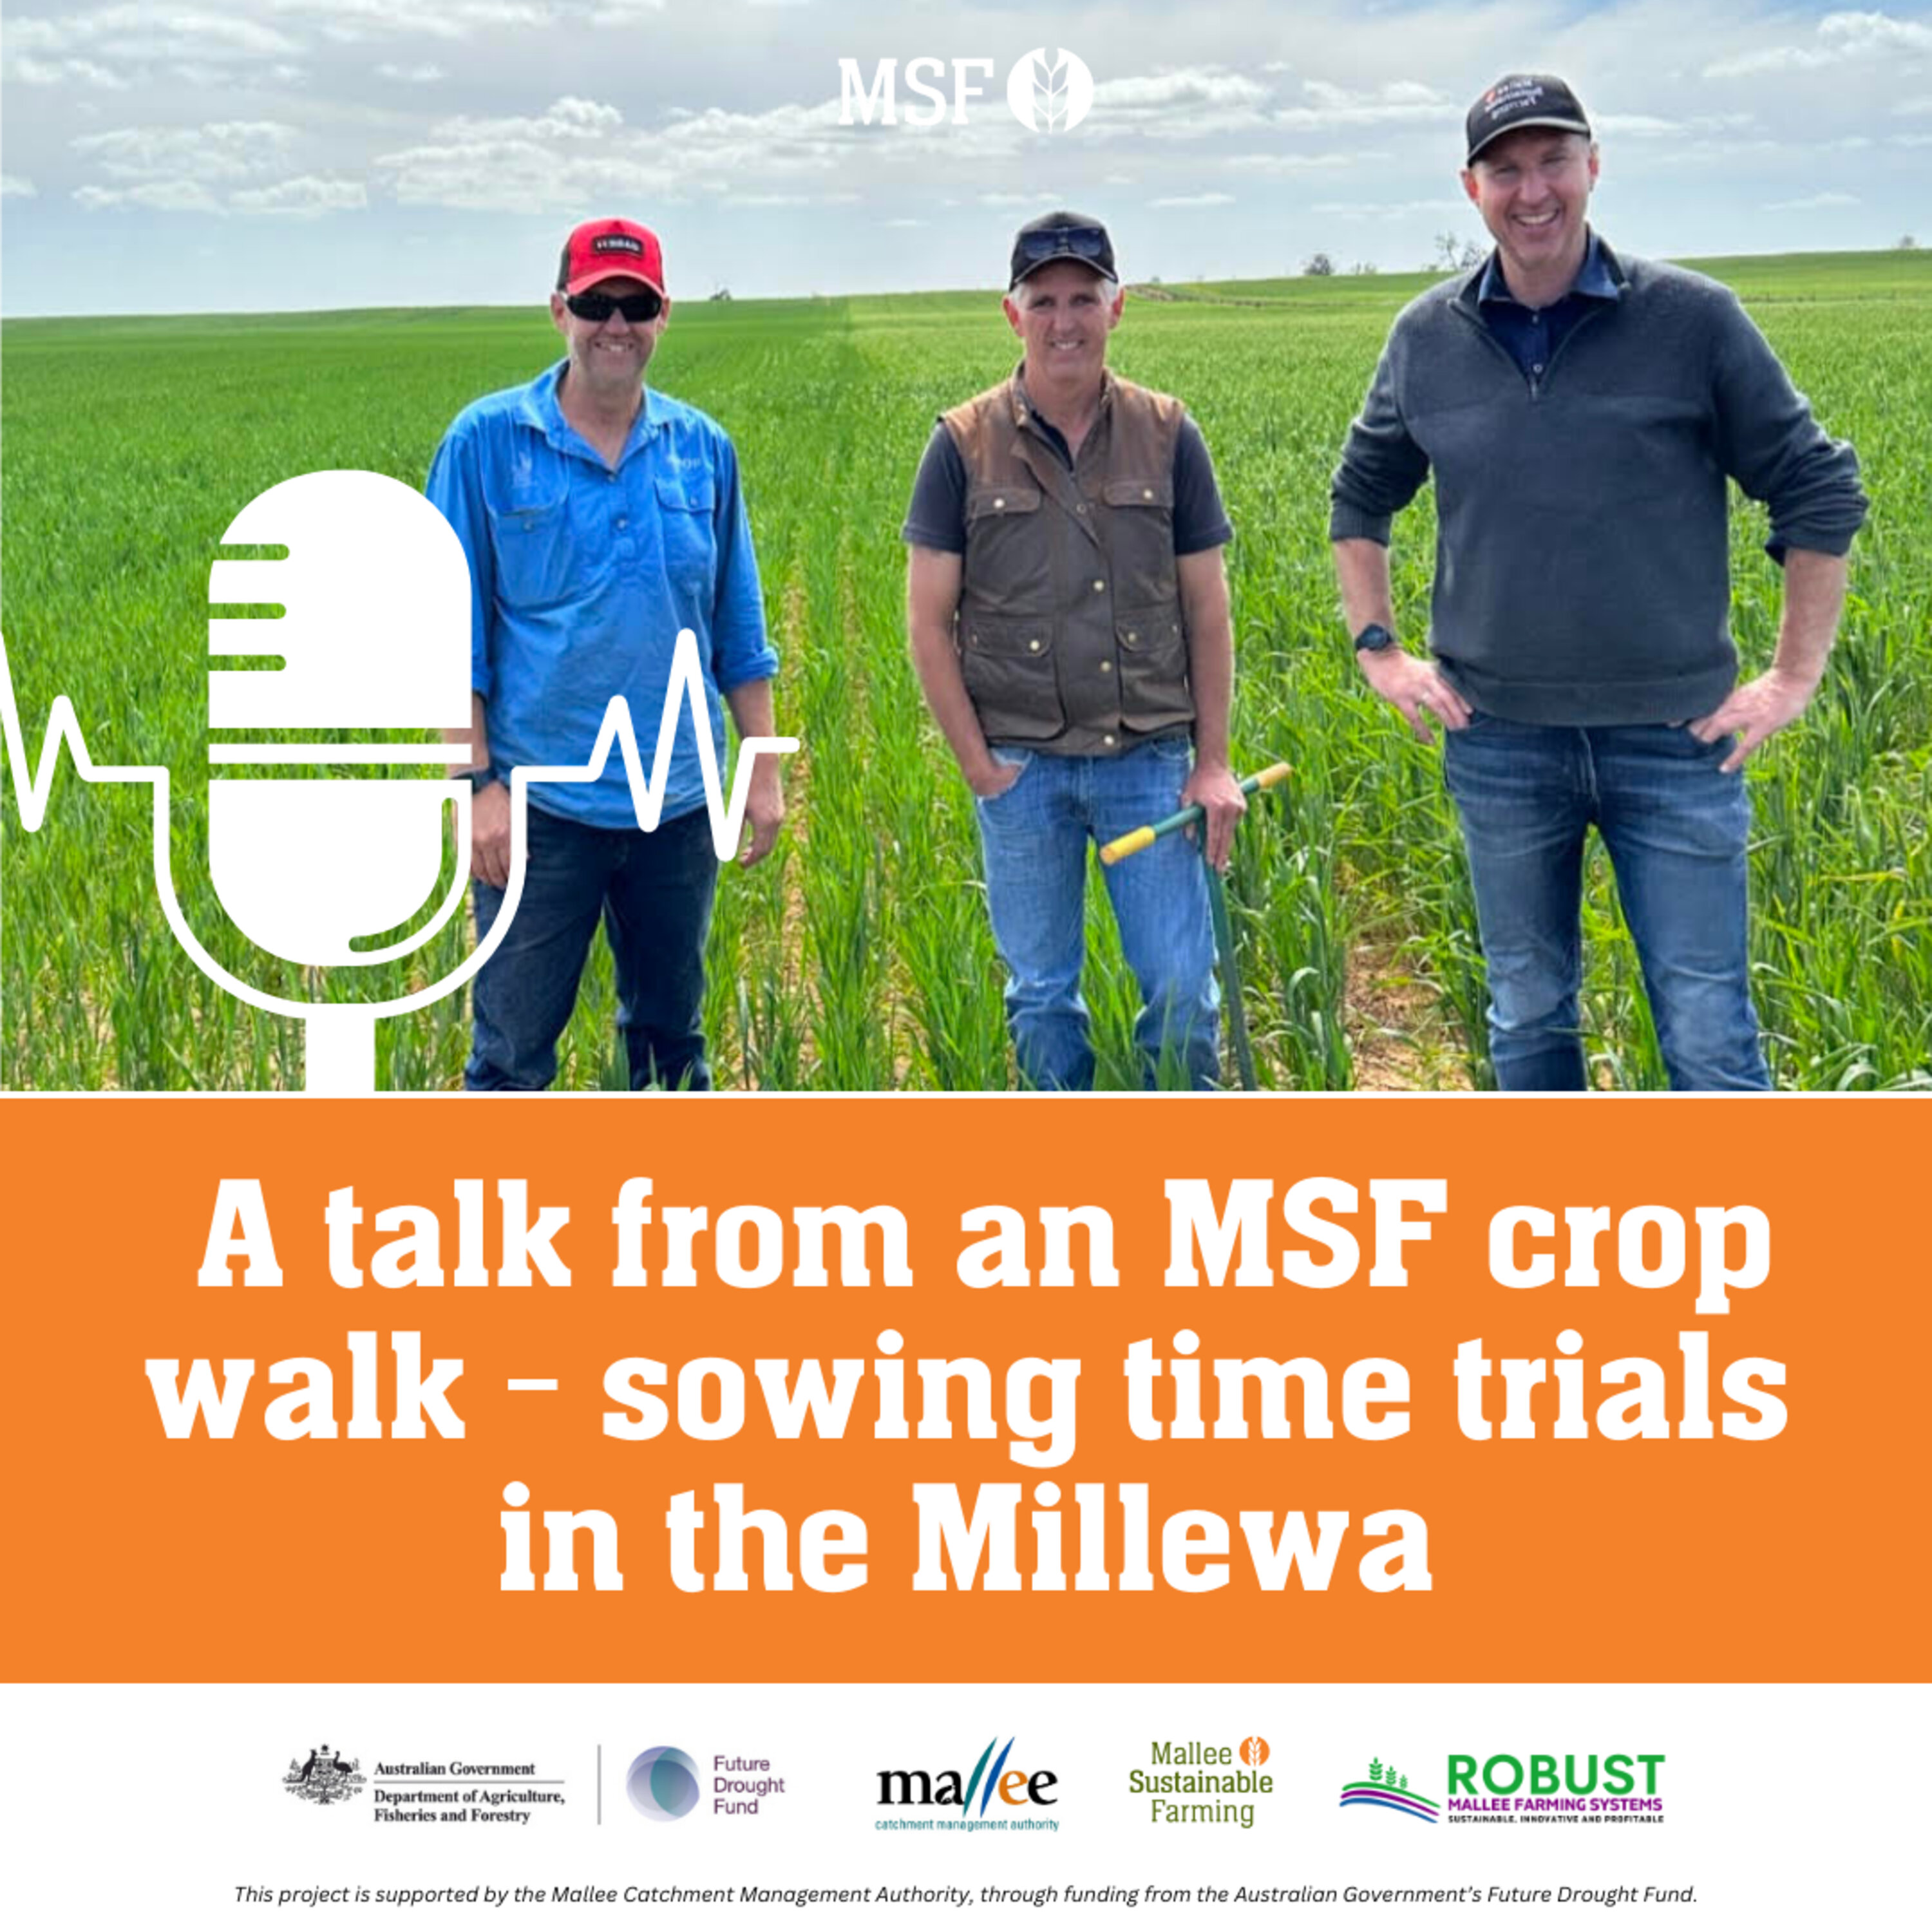 Anthony Rowe – A talk from an MSF crop walk: Sowing time and vari-rate trials in the Millewa.